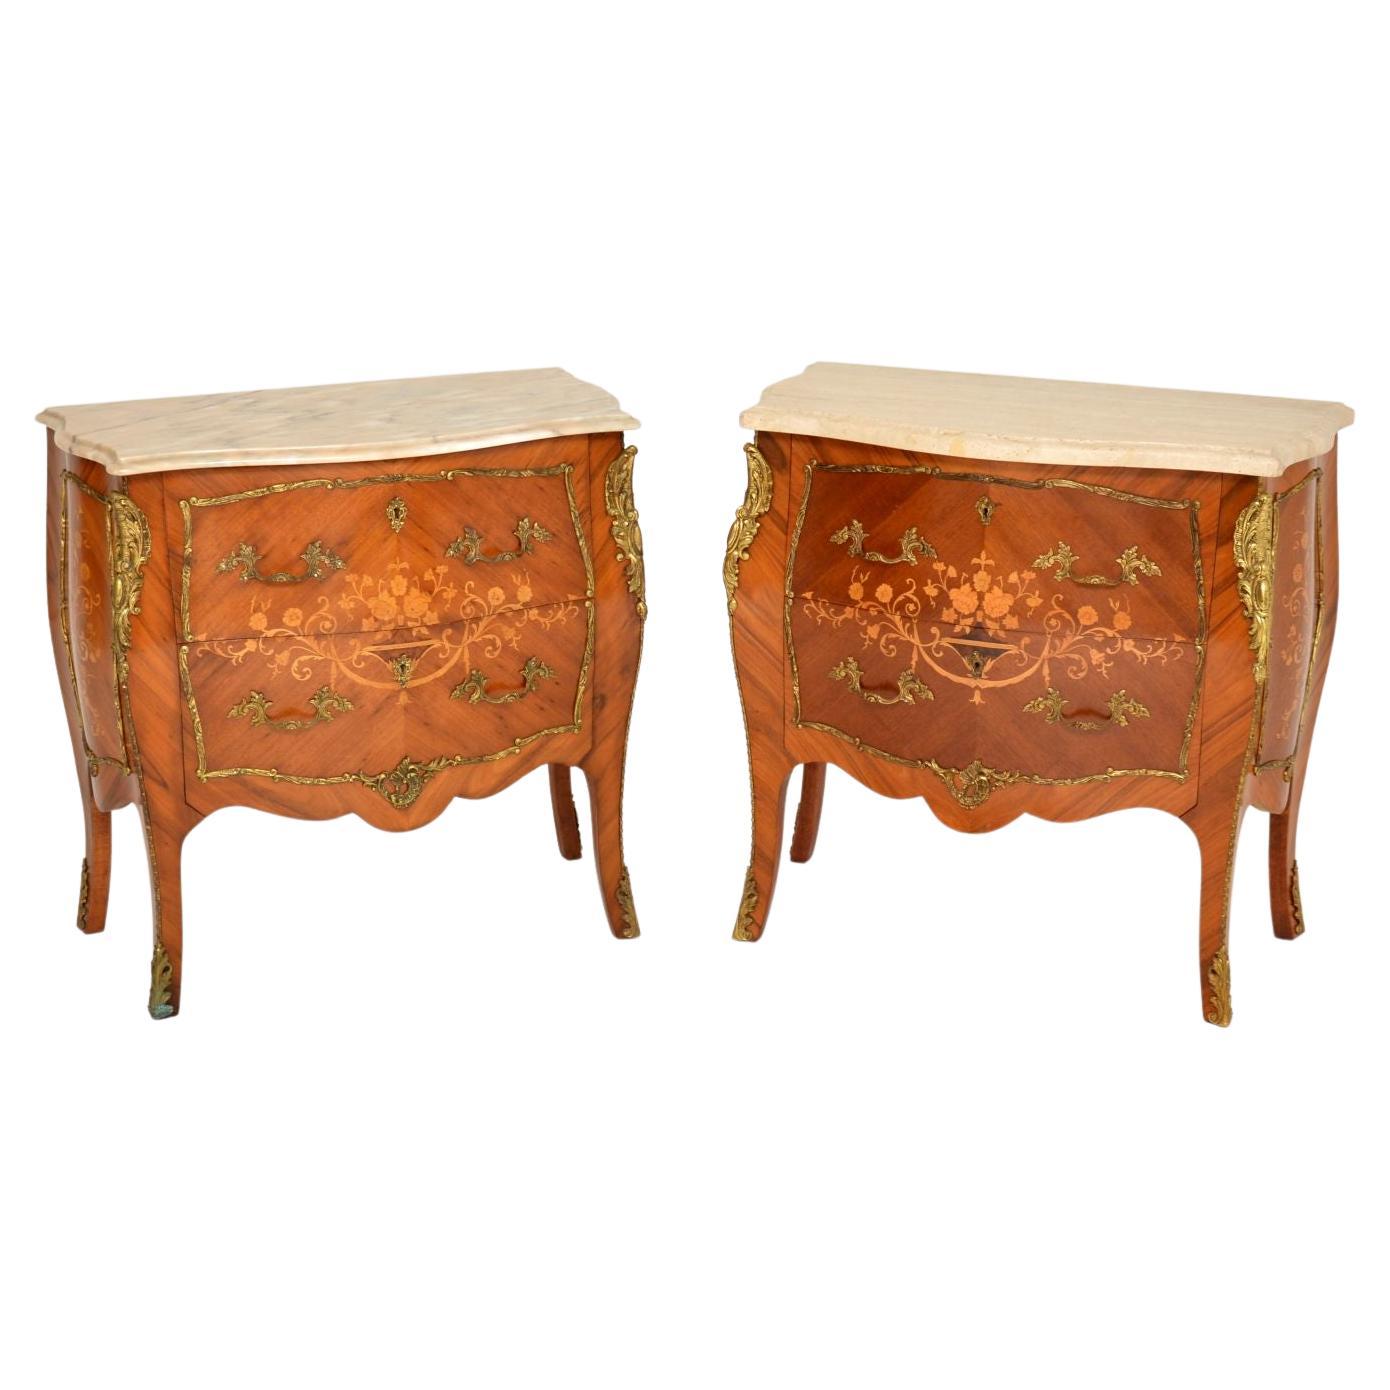 Pair of Antique French Marble Top Inlaid Marquetry Commodes